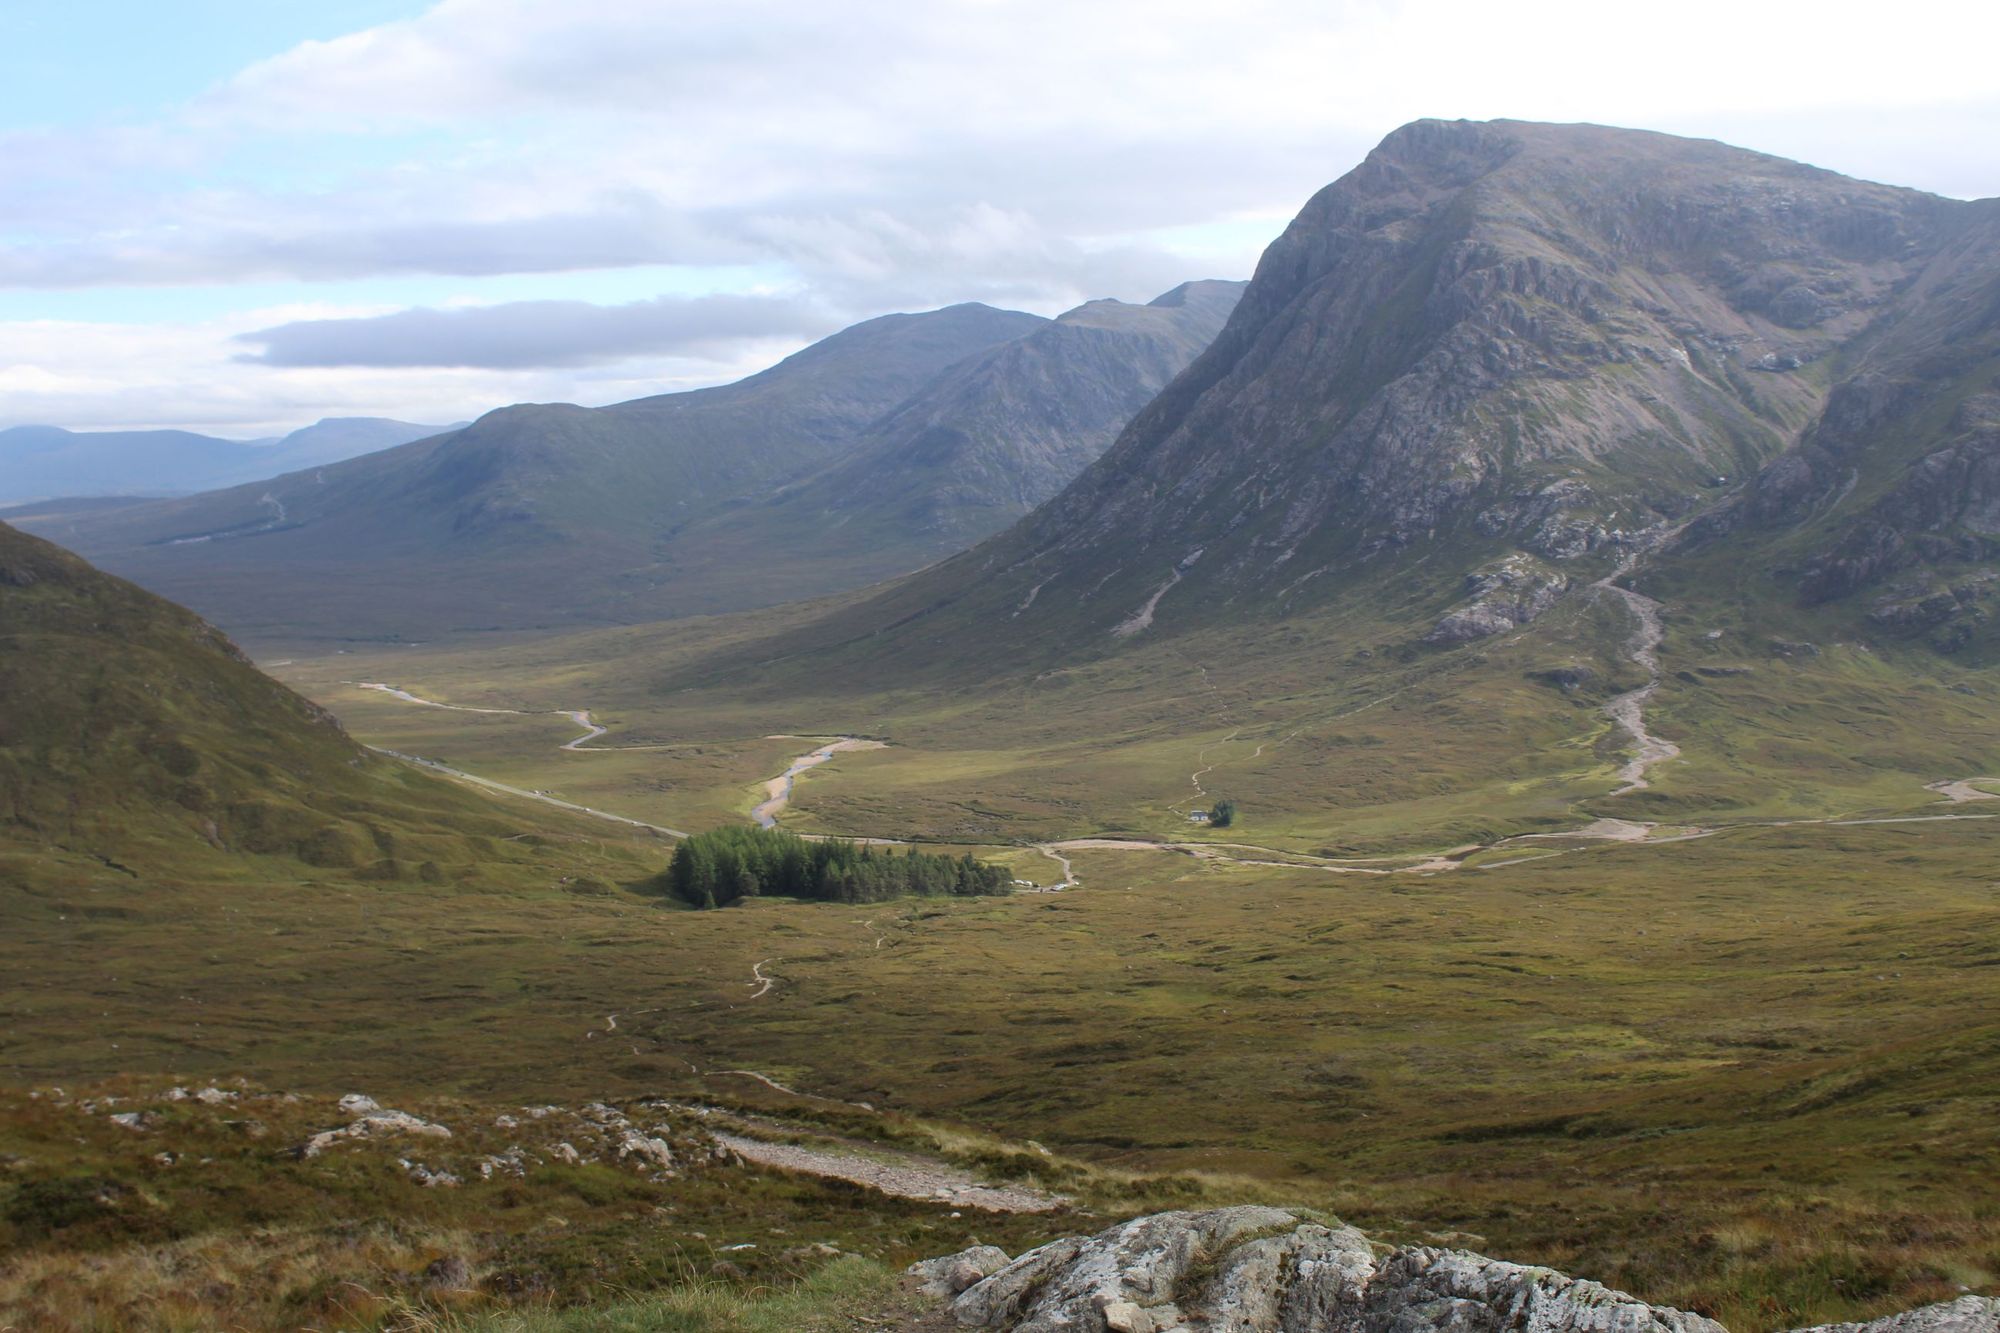 The view of Glencoe from Devil's Staircase